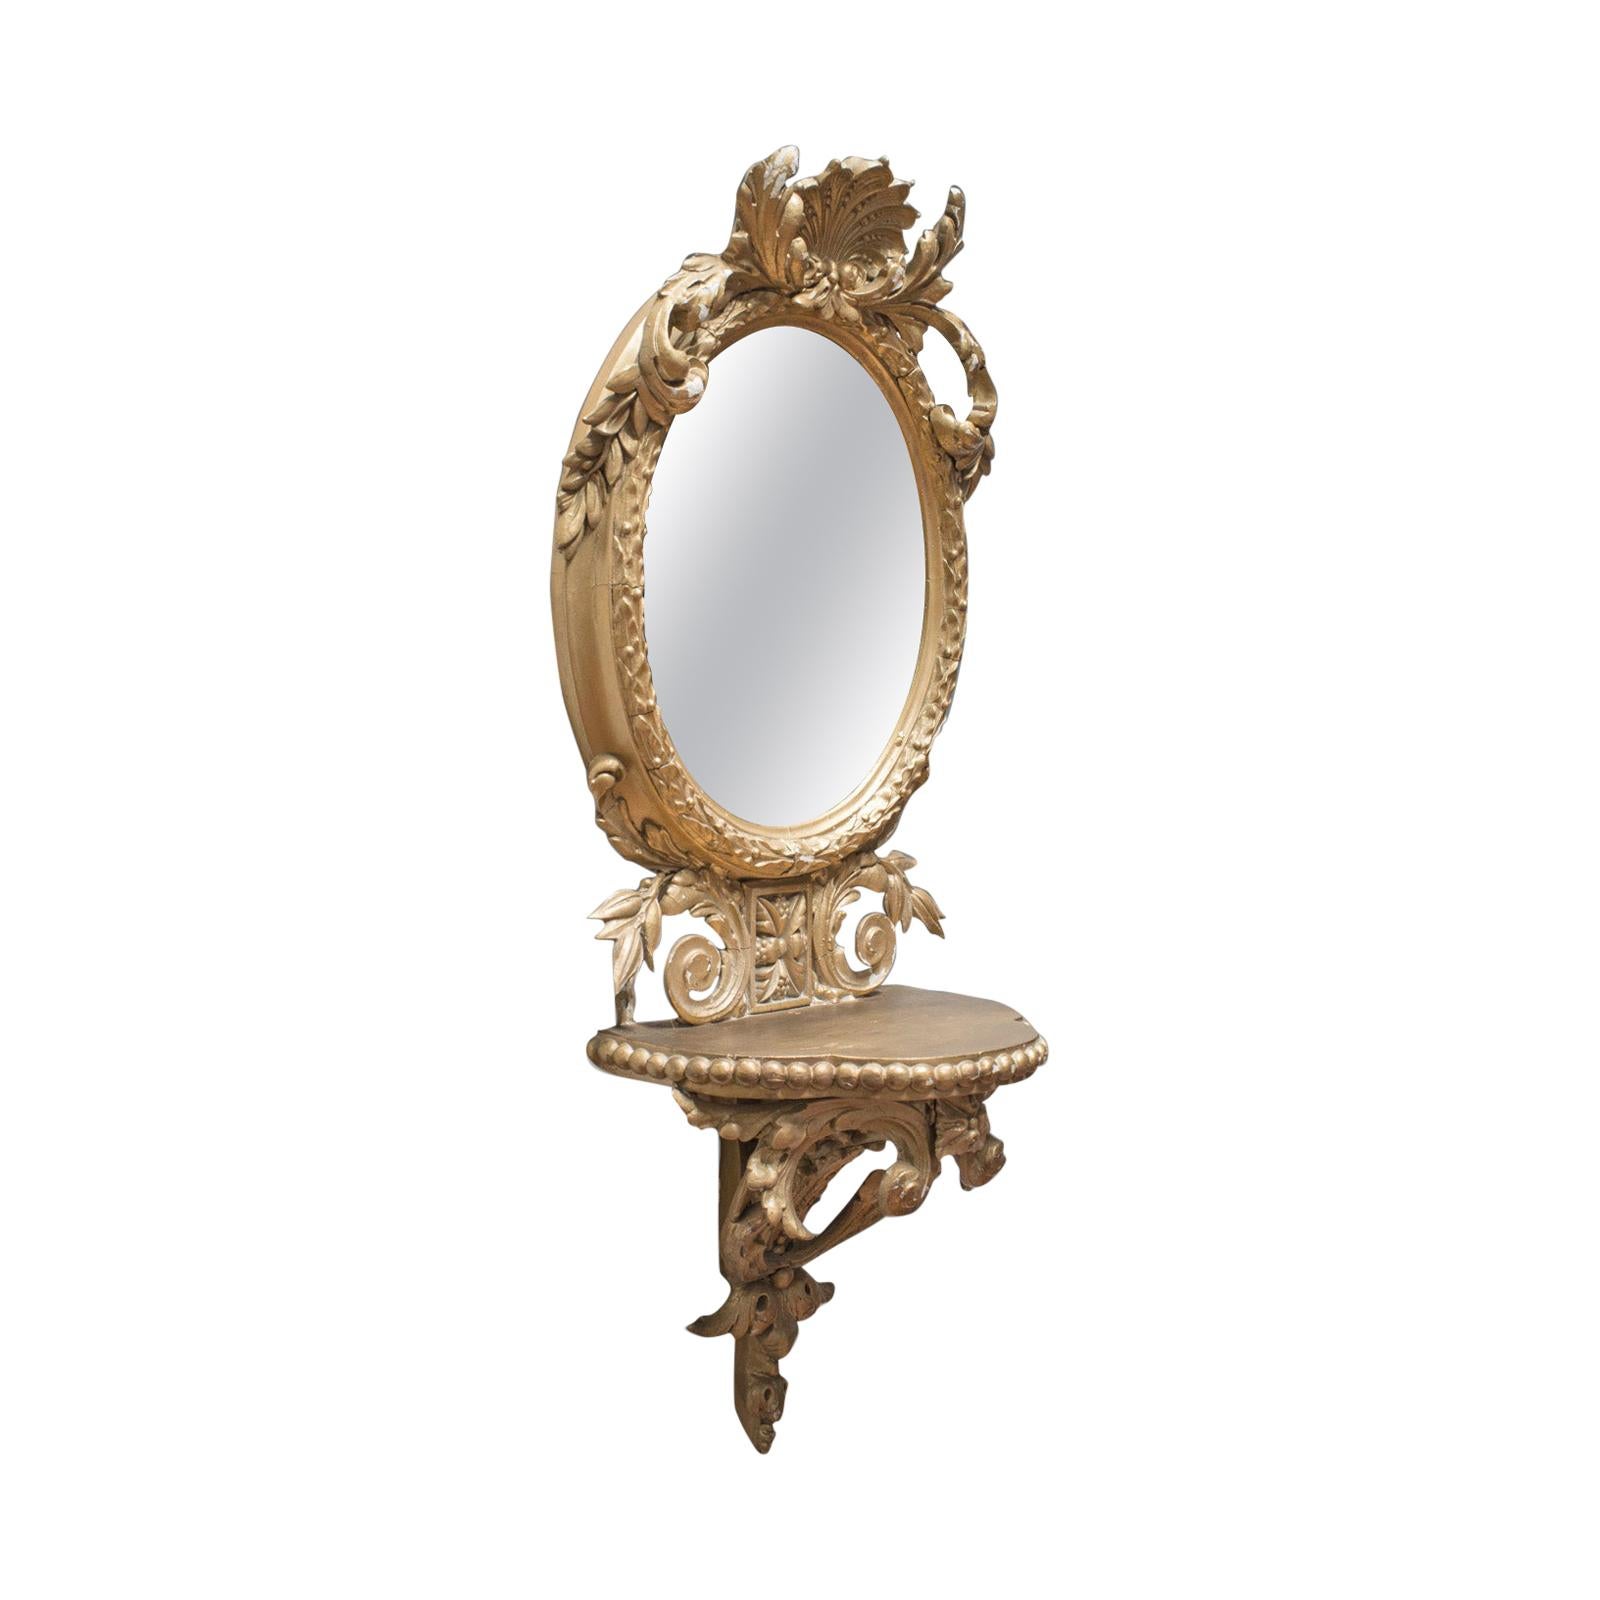 Antique Wall Mirror, French, Gilt Gesso, Oval, Ornate, Victorian, circa 1850 For Sale